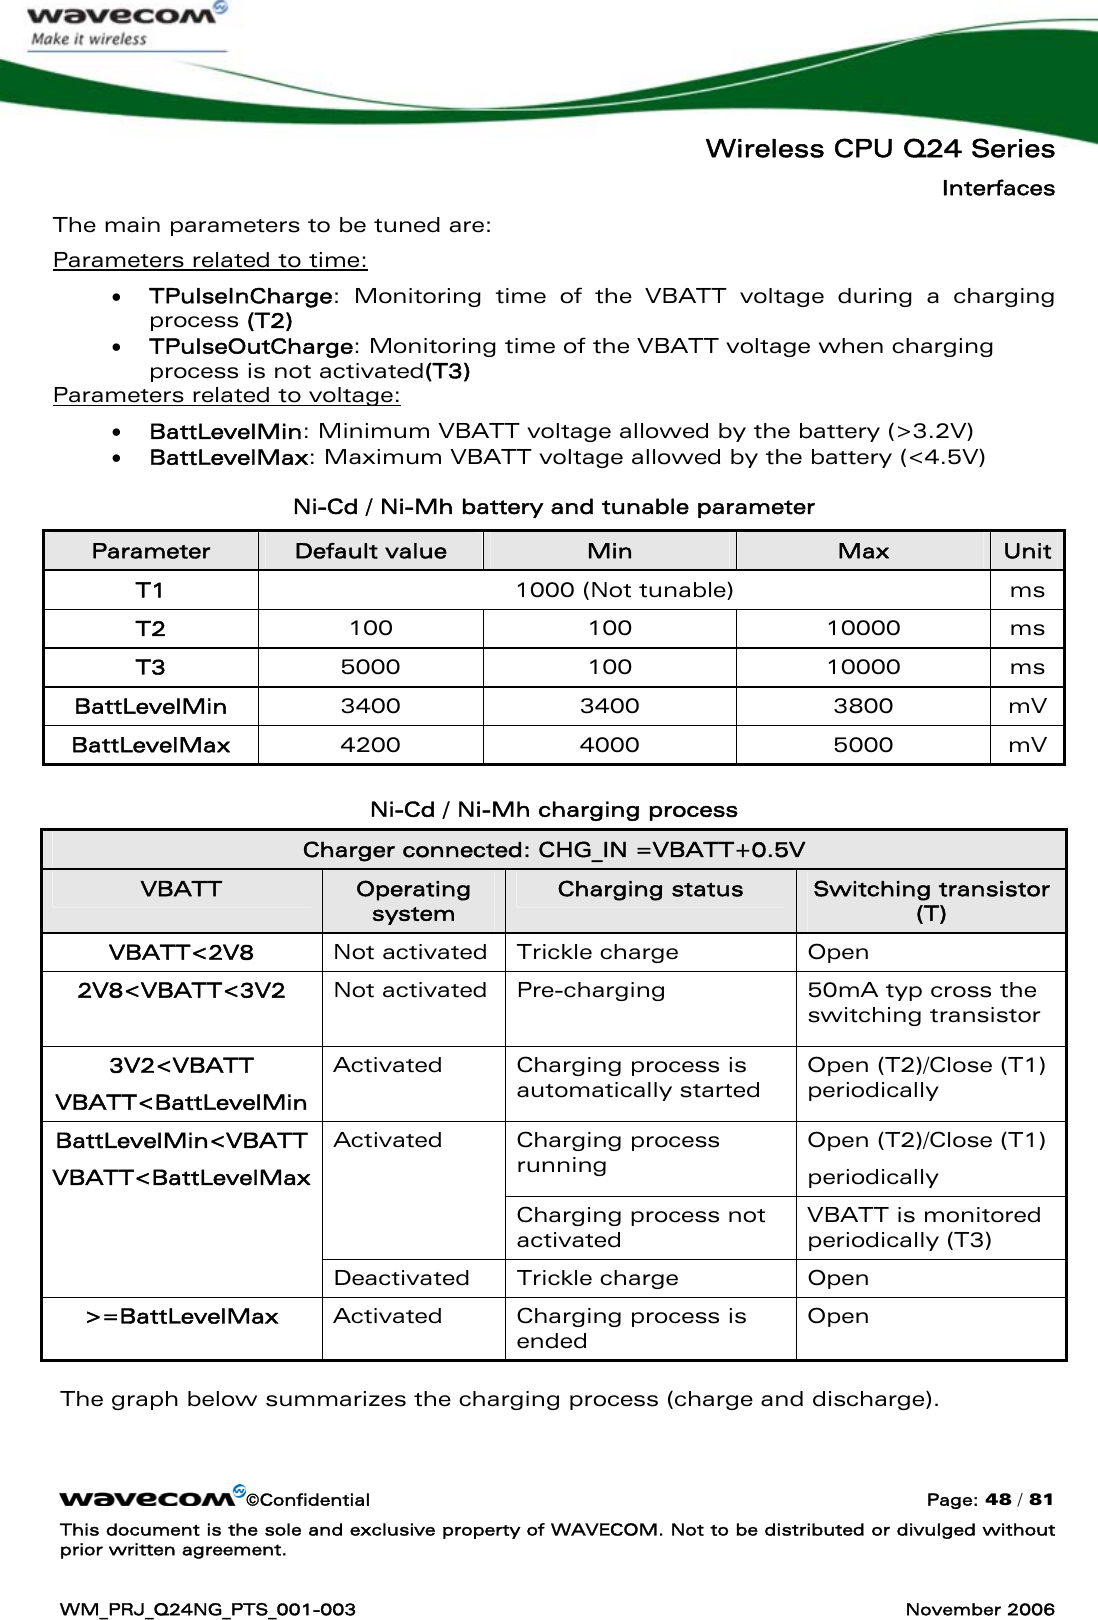   Wireless CPU Q24 Series Interfaces ©Confidential  Page: 48 / 81 This document is the sole and exclusive property of WAVECOM. Not to be distributed or divulged without prior written agreement.  WM_PRJ_Q24NG_PTS_001-003  November 2006  The main parameters to be tuned are: Parameters related to time: • TPulseInCharge: Monitoring time of the VBATT voltage during a charging process (T2) • TPulseOutCharge: Monitoring time of the VBATT voltage when charging process is not activated(T3) Parameters related to voltage: • BattLevelMin: Minimum VBATT voltage allowed by the battery (&gt;3.2V) • BattLevelMax: Maximum VBATT voltage allowed by the battery (&lt;4.5V)  Ni-Cd / Ni-Mh battery and tunable parameter Parameter  Default value  Min  Max  Unit T1  1000 (Not tunable)  ms T2  100 100 10000 ms T3  5000 100  10000 ms BattLevelMin  3400 3400  3800 mV BattLevelMax  4200 4000  5000 mV  Ni-Cd / Ni-Mh charging process Charger connected: CHG_IN =VBATT+0.5V VBATT  Operating system Charging status  Switching transistor (T) VBATT&lt;2V8  Not activated  Trickle charge  Open 2V8&lt;VBATT&lt;3V2  Not activated  Pre-charging  50mA typ cross the switching transistor 3V2&lt;VBATT VBATT&lt;BattLevelMin Activated Charging process is automatically started Open (T2)/Close (T1) periodically Charging process running Open (T2)/Close (T1) periodically Activated Charging process not activated VBATT is monitored periodically (T3) BattLevelMin&lt;VBATT VBATT&lt;BattLevelMax Deactivated Trickle charge  Open &gt;=BattLevelMax  Activated Charging process is ended Open   The graph below summarizes the charging process (charge and discharge).   